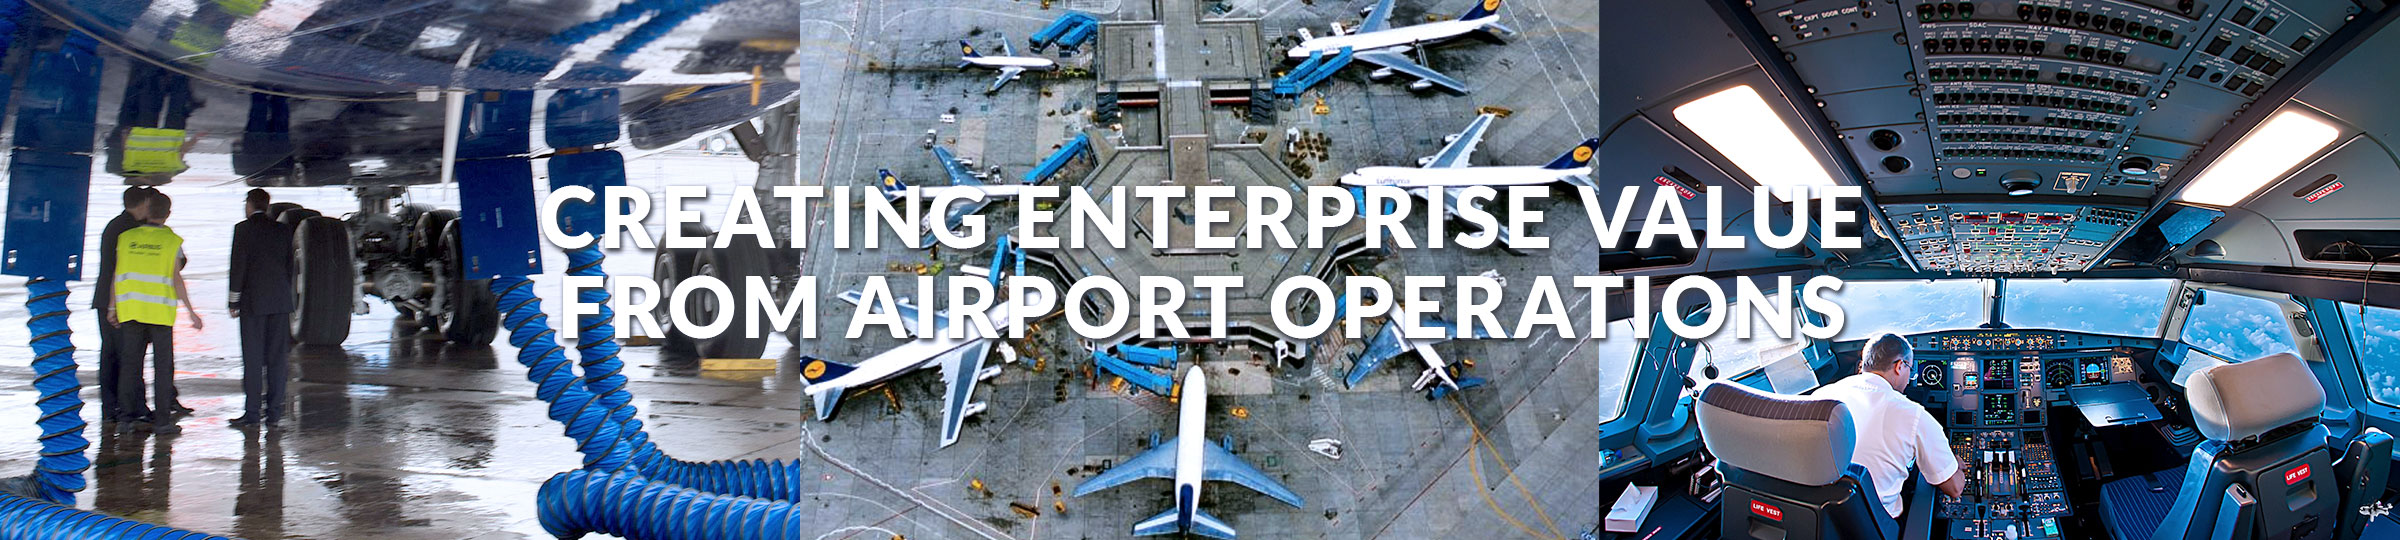 Creating enterprise value from airport operations with CrissCross International